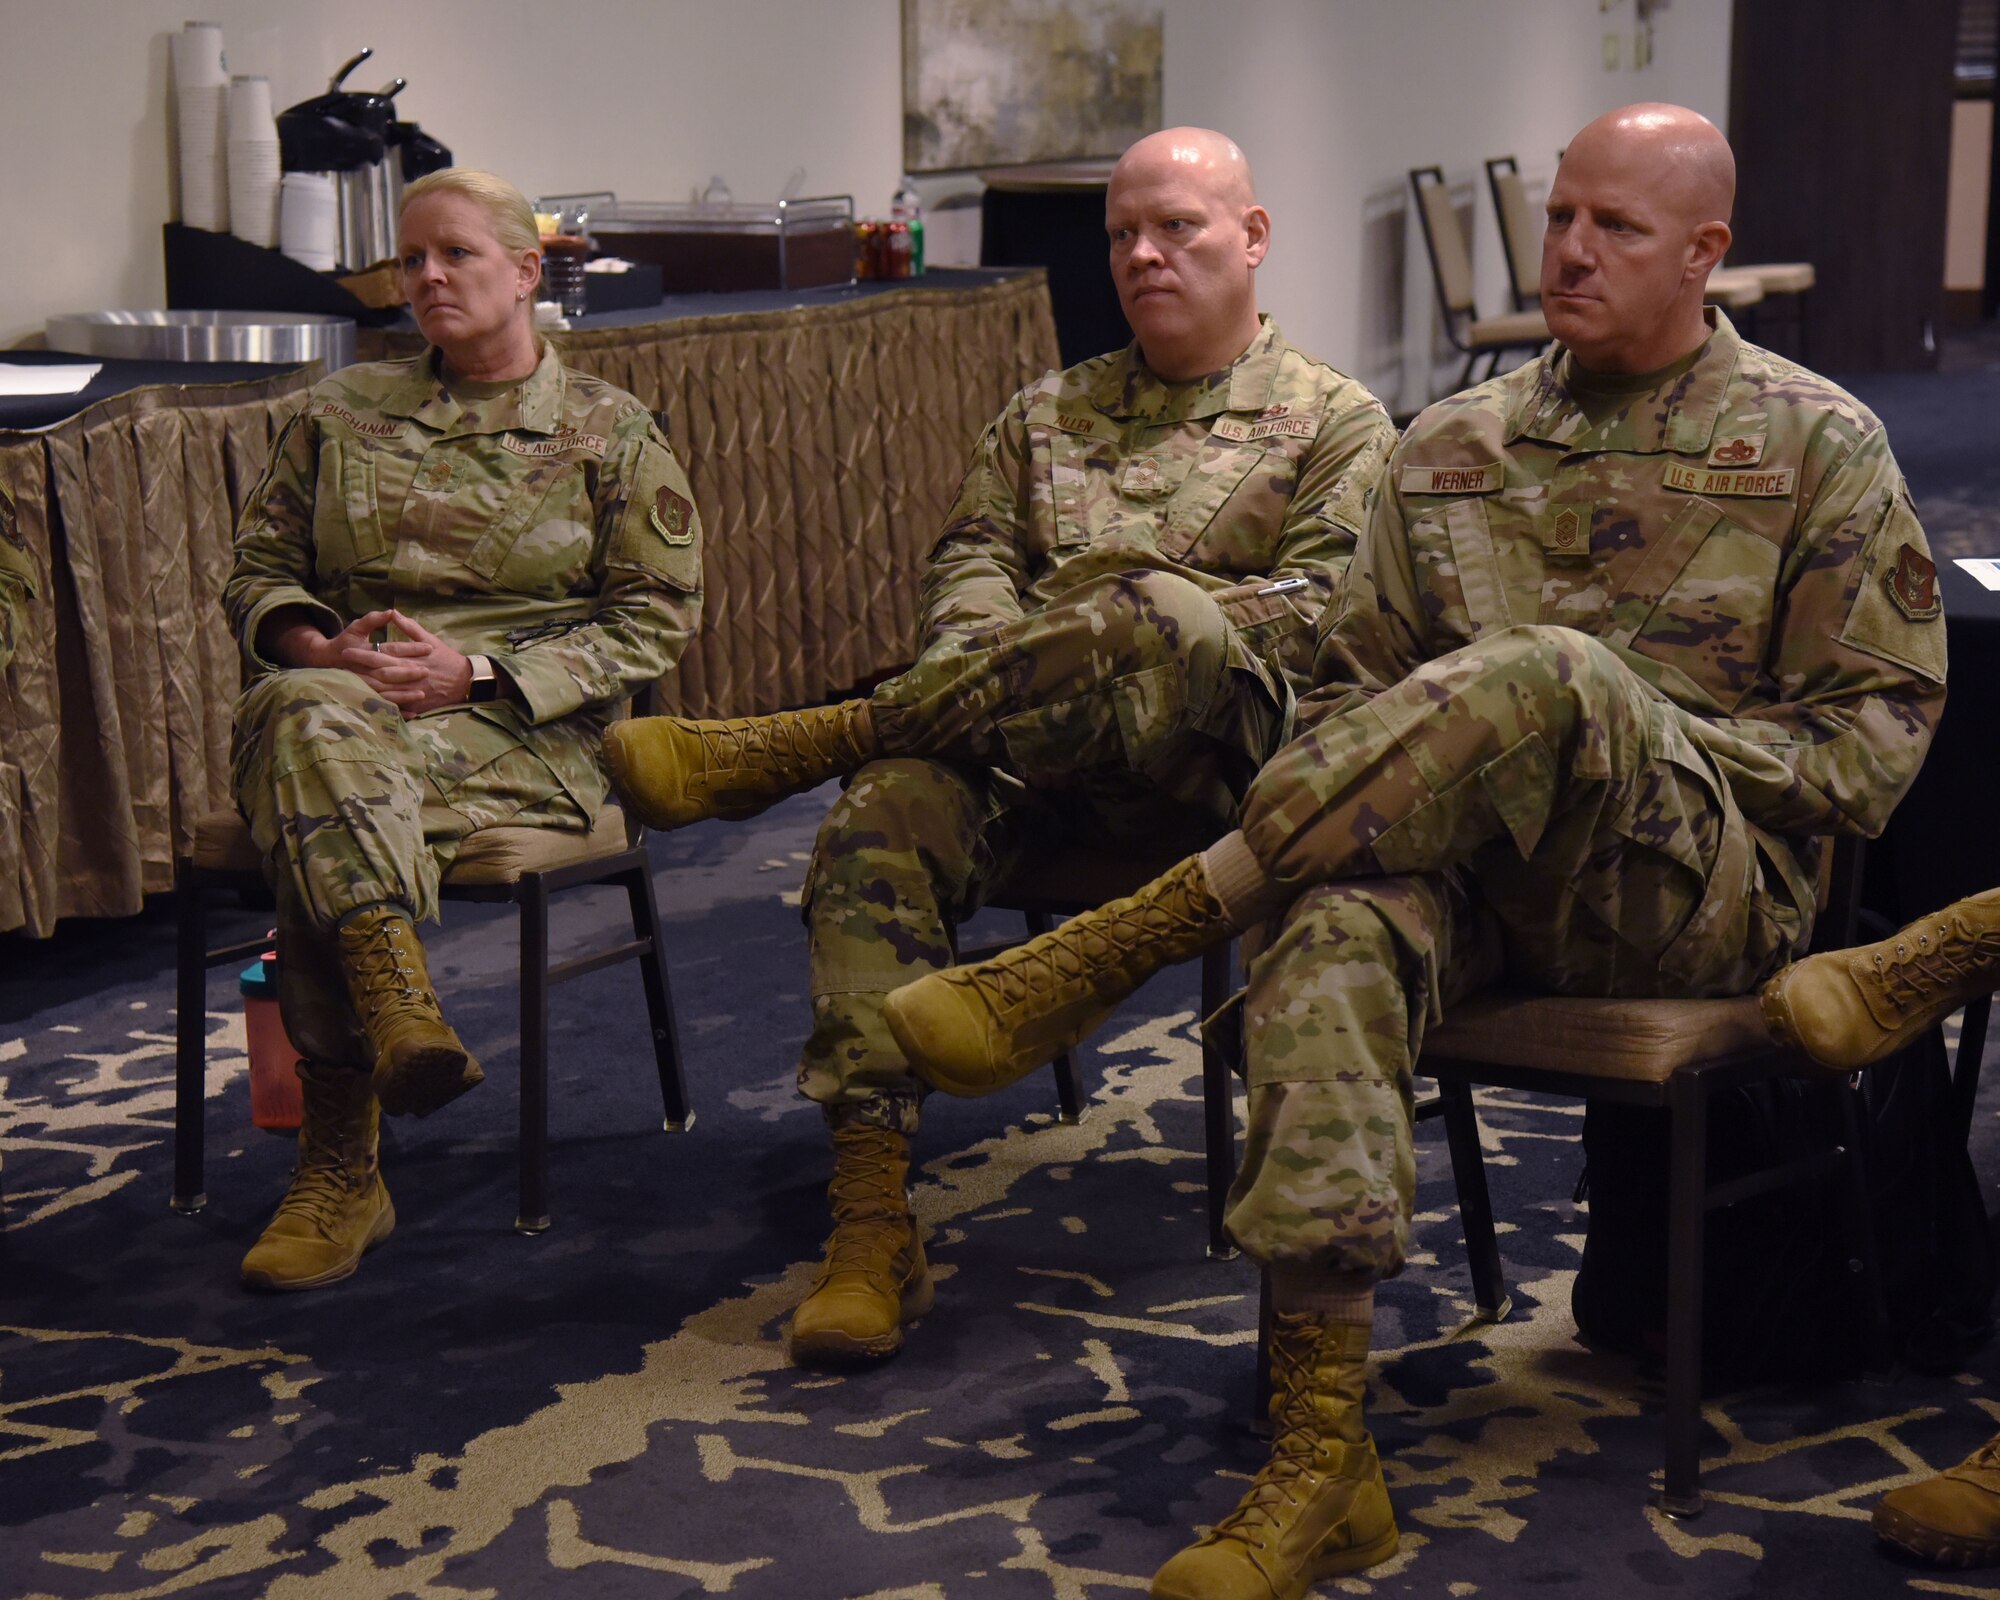 Chief Master Sgt. Catherine E. Buchanan, left, 944th Fighter Wing command chief, Chief Master Sgt. Jeremy Allen, middle, 482nd Fighter Wing command chief, and Chief Master Sergeant Leonard F. Werner III, 307th Bomb Wing command chief, participate in a discussion during the Annual Commanders and Command Chiefs management and leadership review event held in Fort Worth, Texas, June 20-23. The three-day session focused on disseminating information from 10th Air Force senior leaders to commanders and chief master sergeants on various topics to include budgeting, recruitment challenges and force restructure. (U.S. Air Force photo by 2nd Lt. Mary A. Andom)